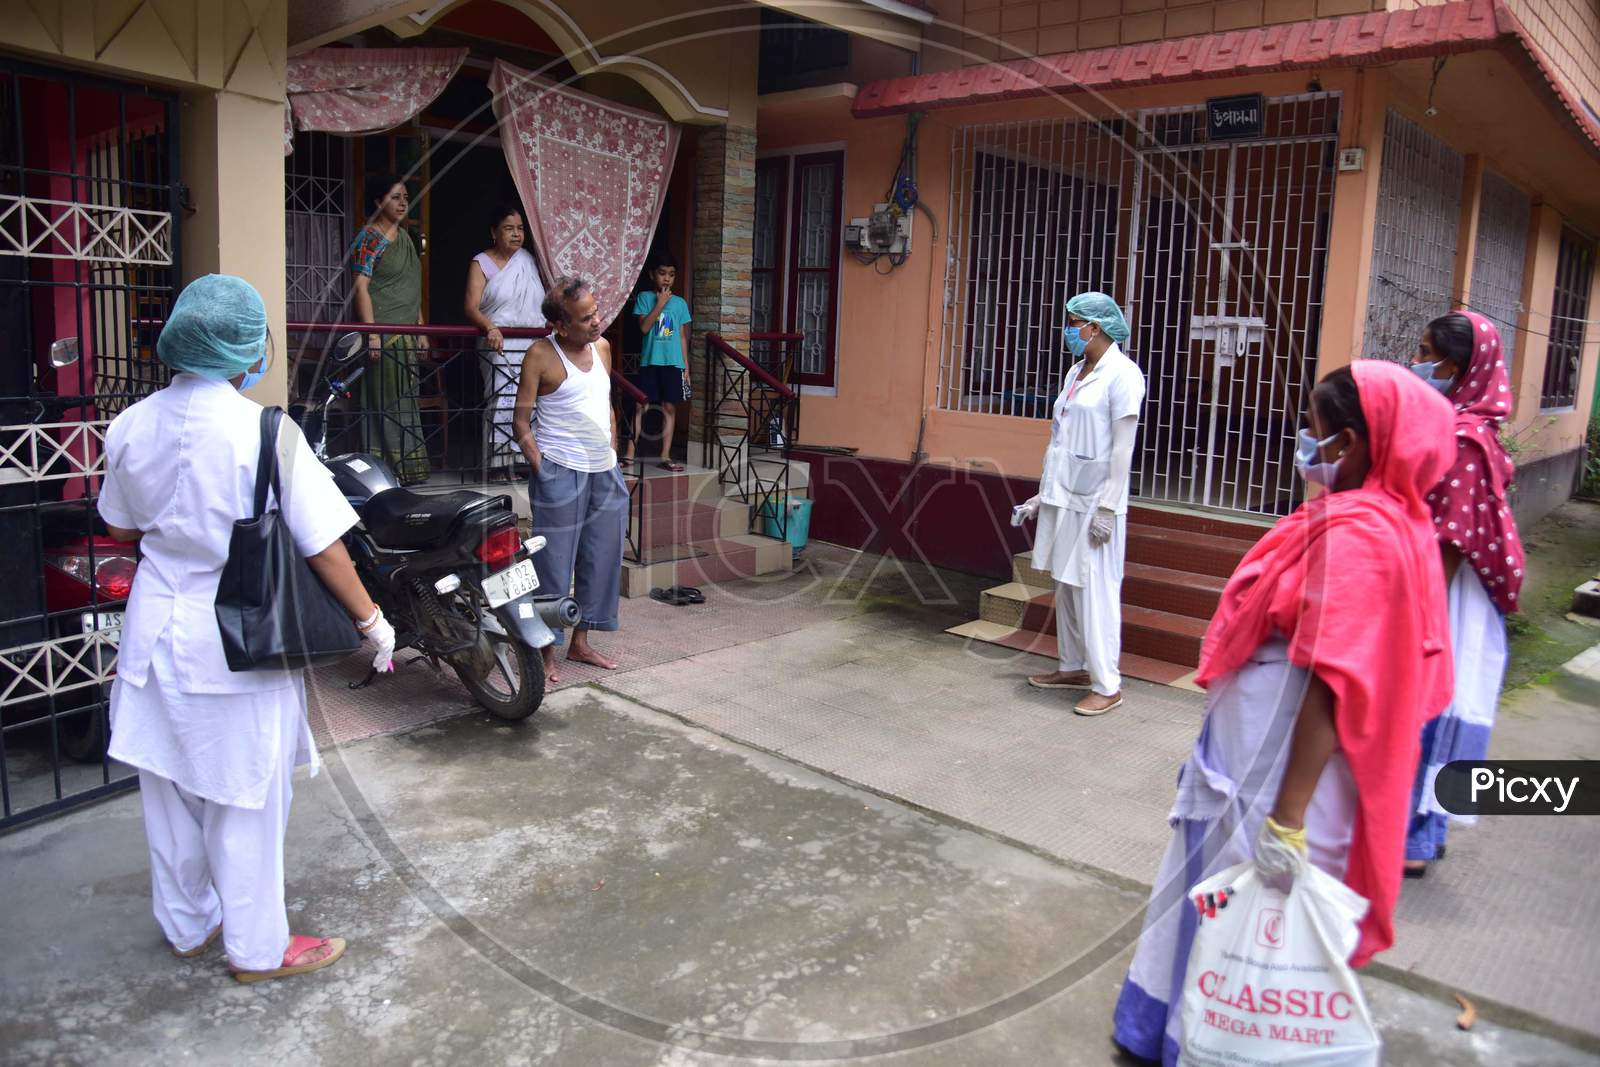 Health Workers Team  Conducting  House To House Health Survey  During Nationwide Lockdown Amidst Coronavirus or COVID-19 Pandemic  In Nagaon District Of Assam,India